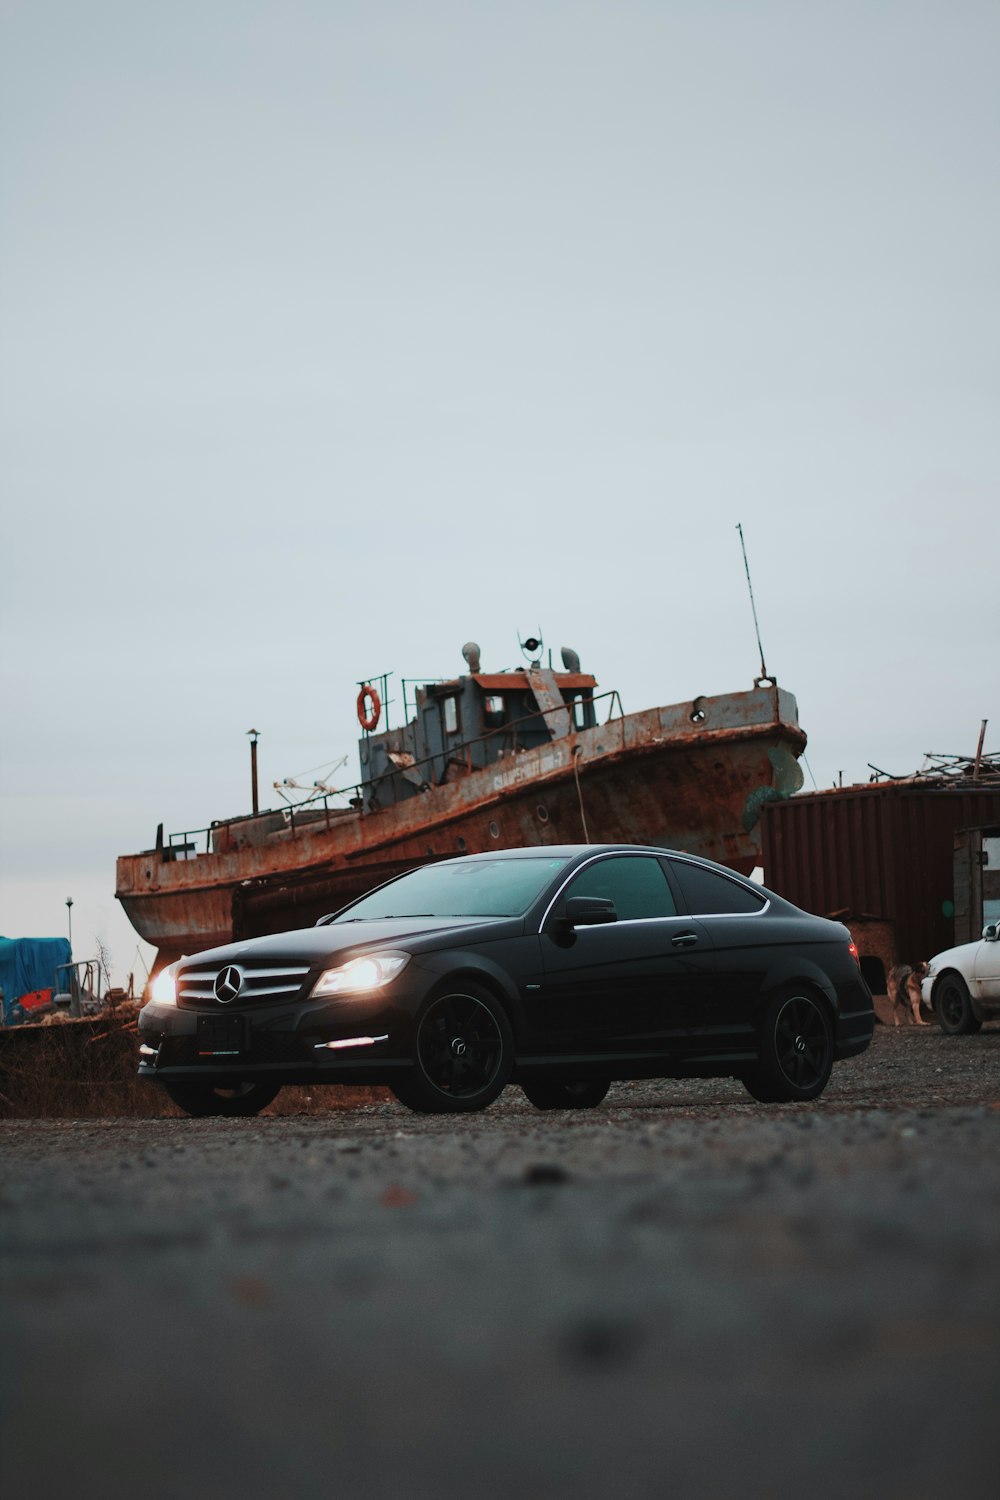 a black car parked in front of a rusted boat